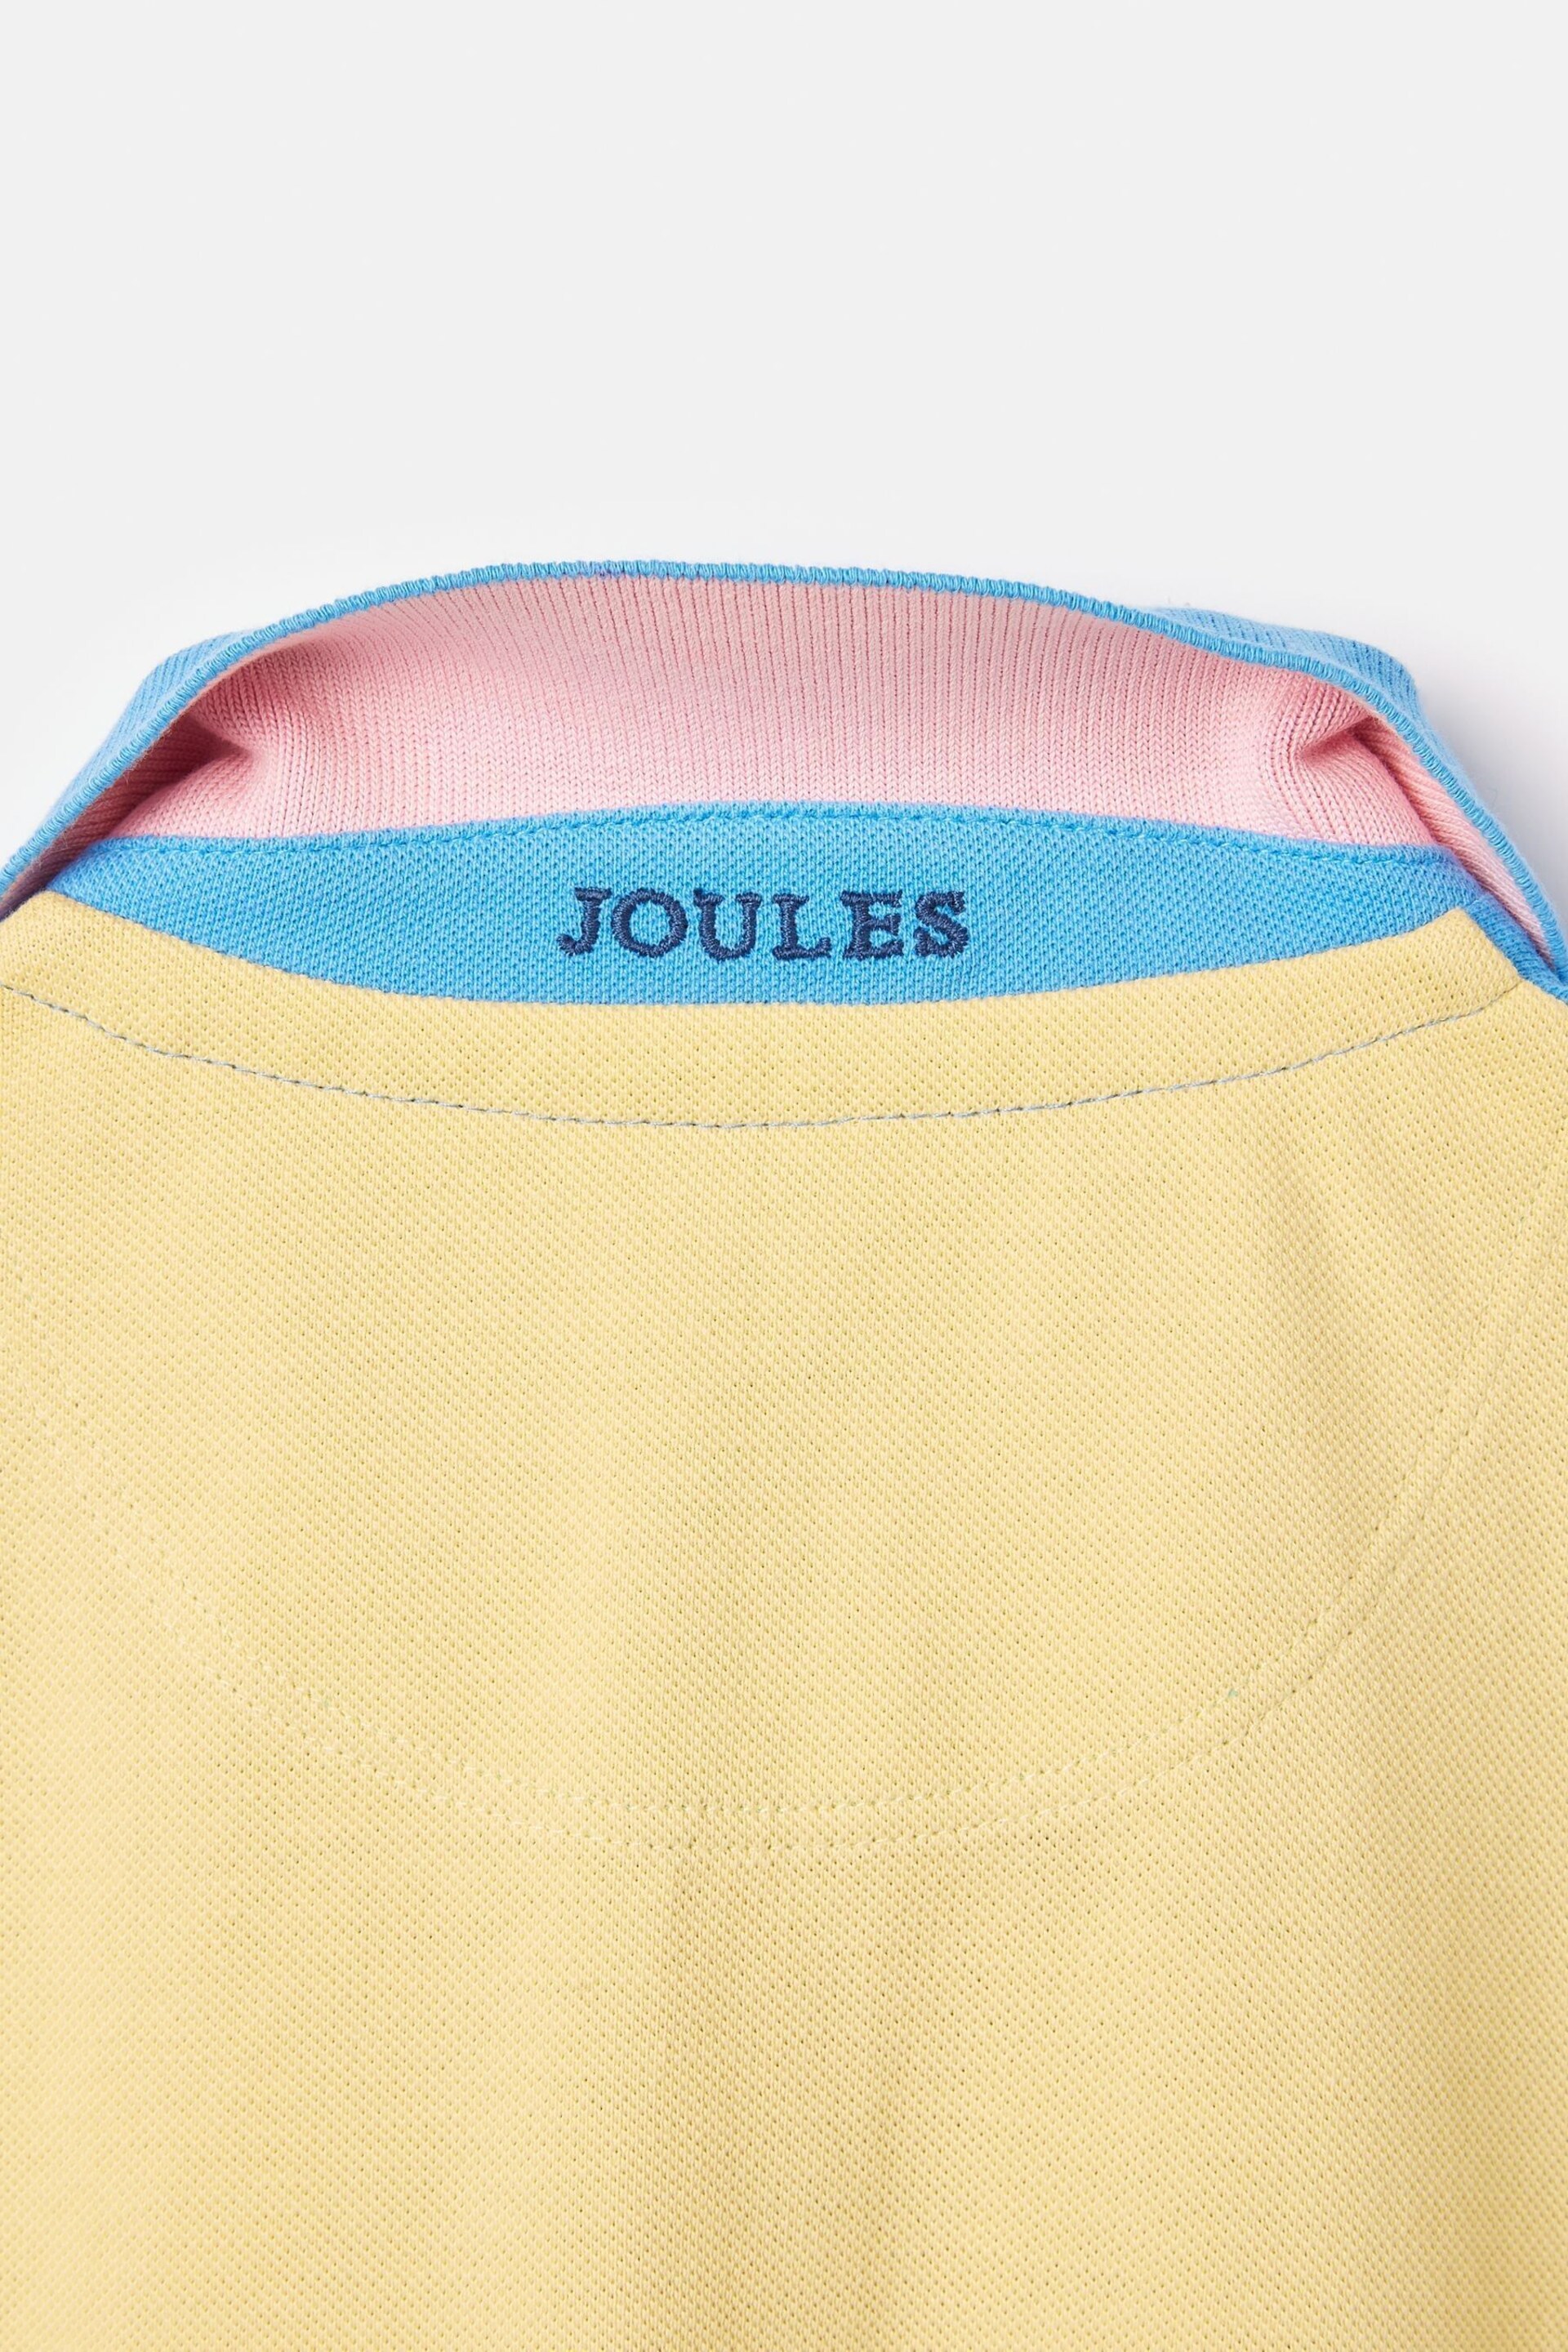 Joules Woody Multi Pique Cotton Polo Shirt - Image 5 of 5